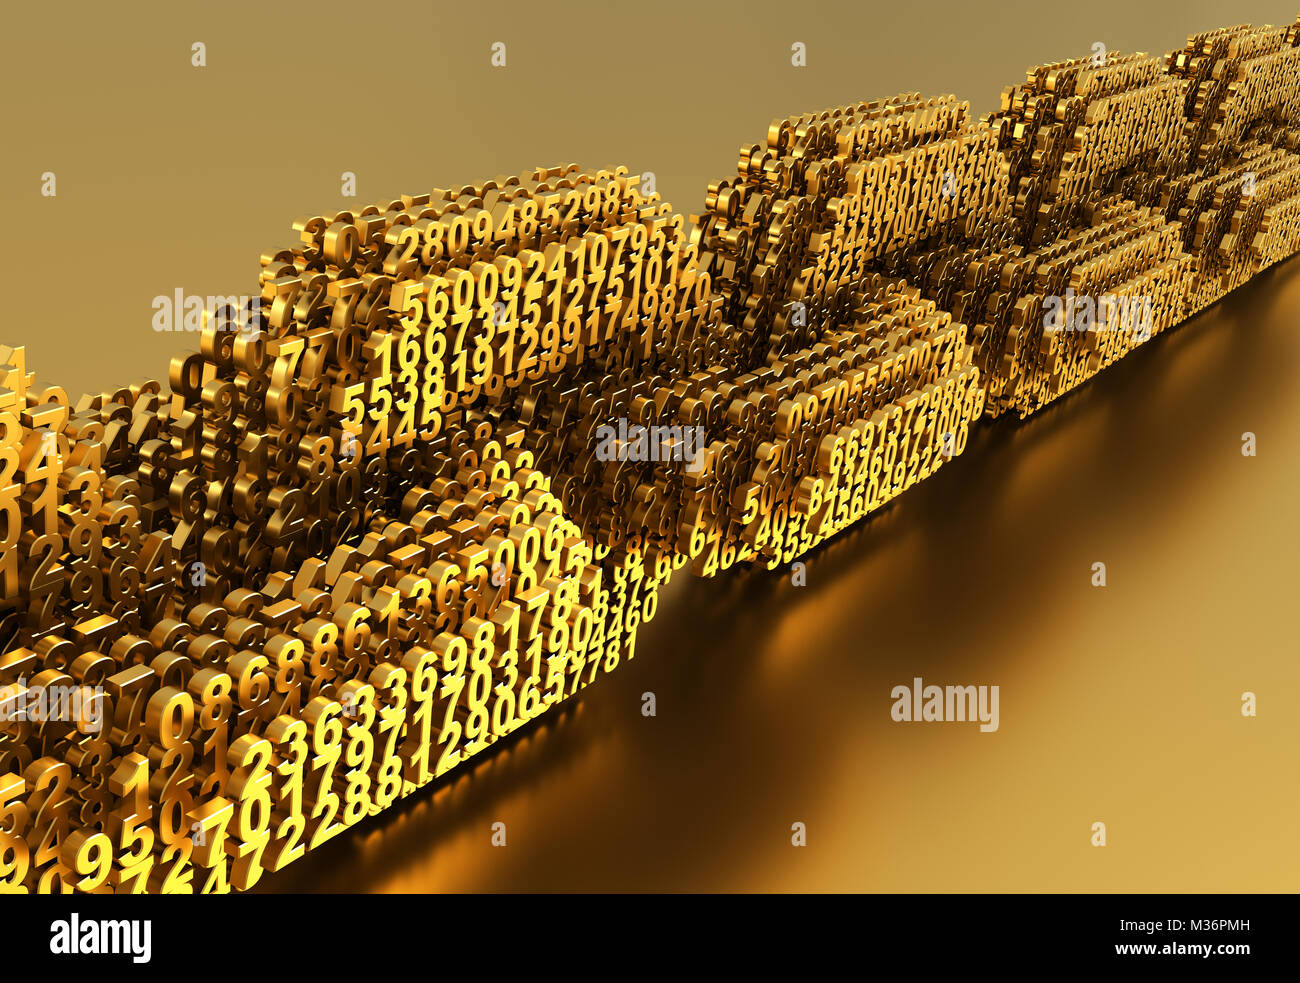 Concept Of Blockchain. Gold Digital Chain Of Interconnected 3D Numbers Stock Photo